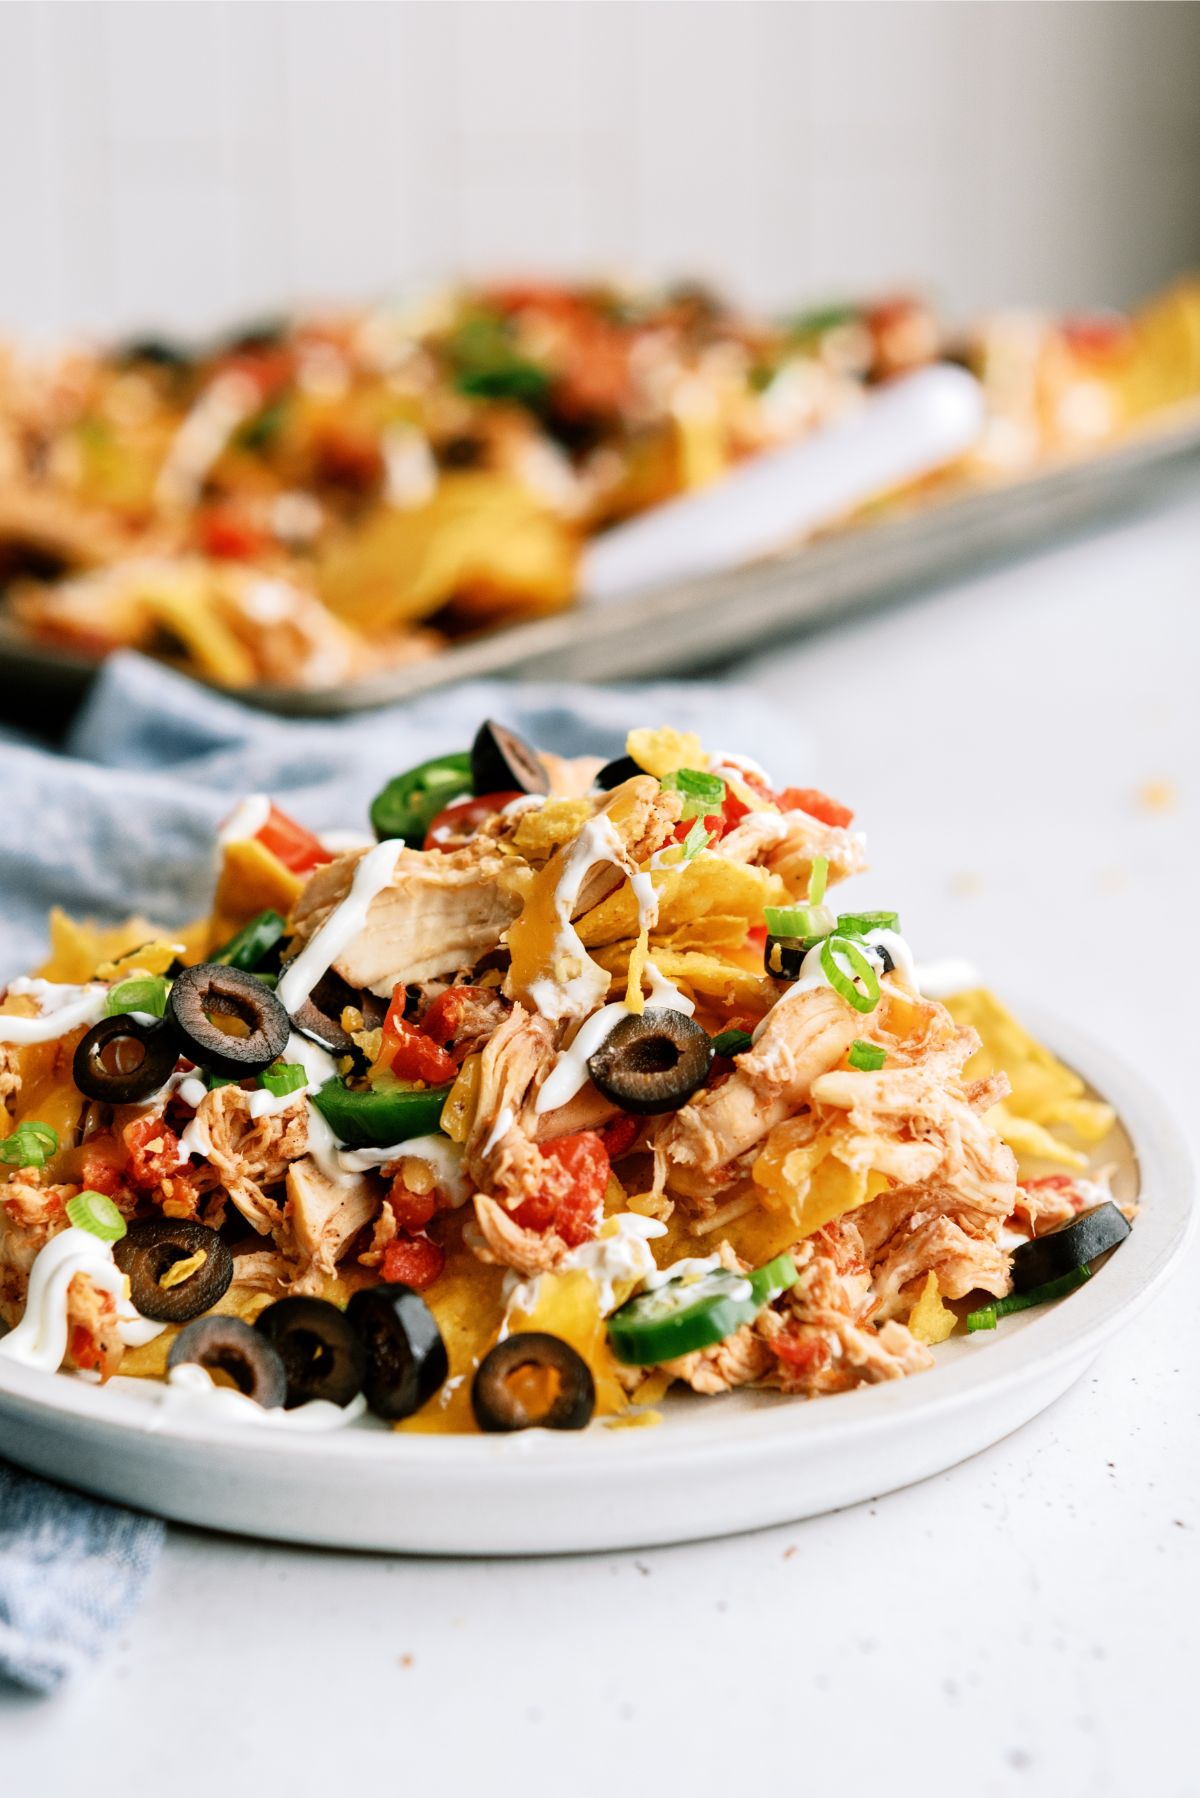 A serving of Slow Cooker Shredded Chicken Nachos on a plate with toppings